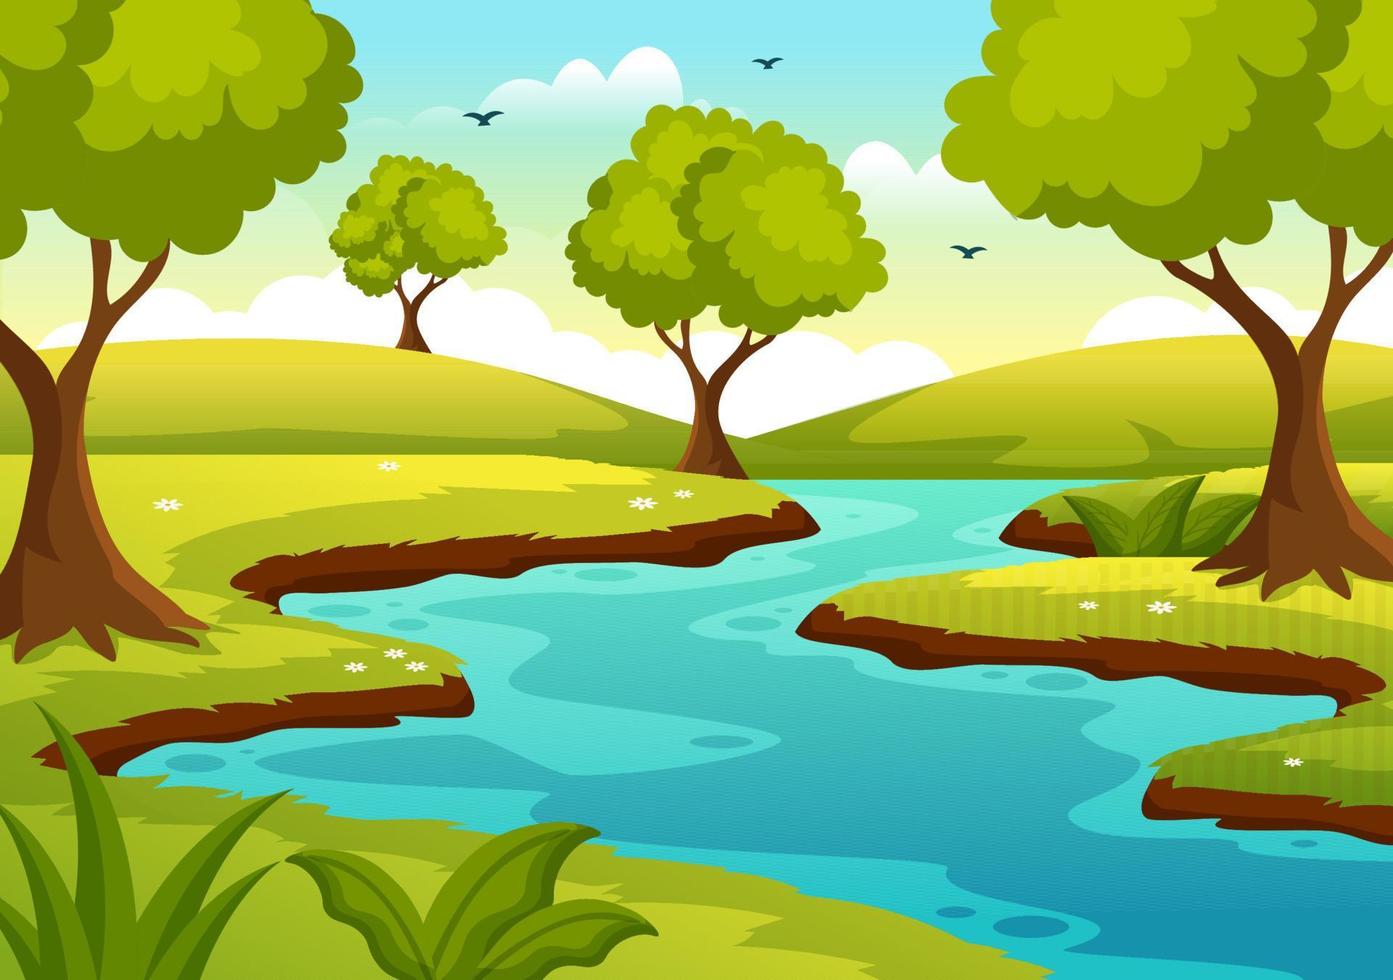 River Landscape Illustration with View Mountains, Green Fields, Trees and Forest Surrounding the Rivers in Flat Cartoon Hand Drawn Templates vector